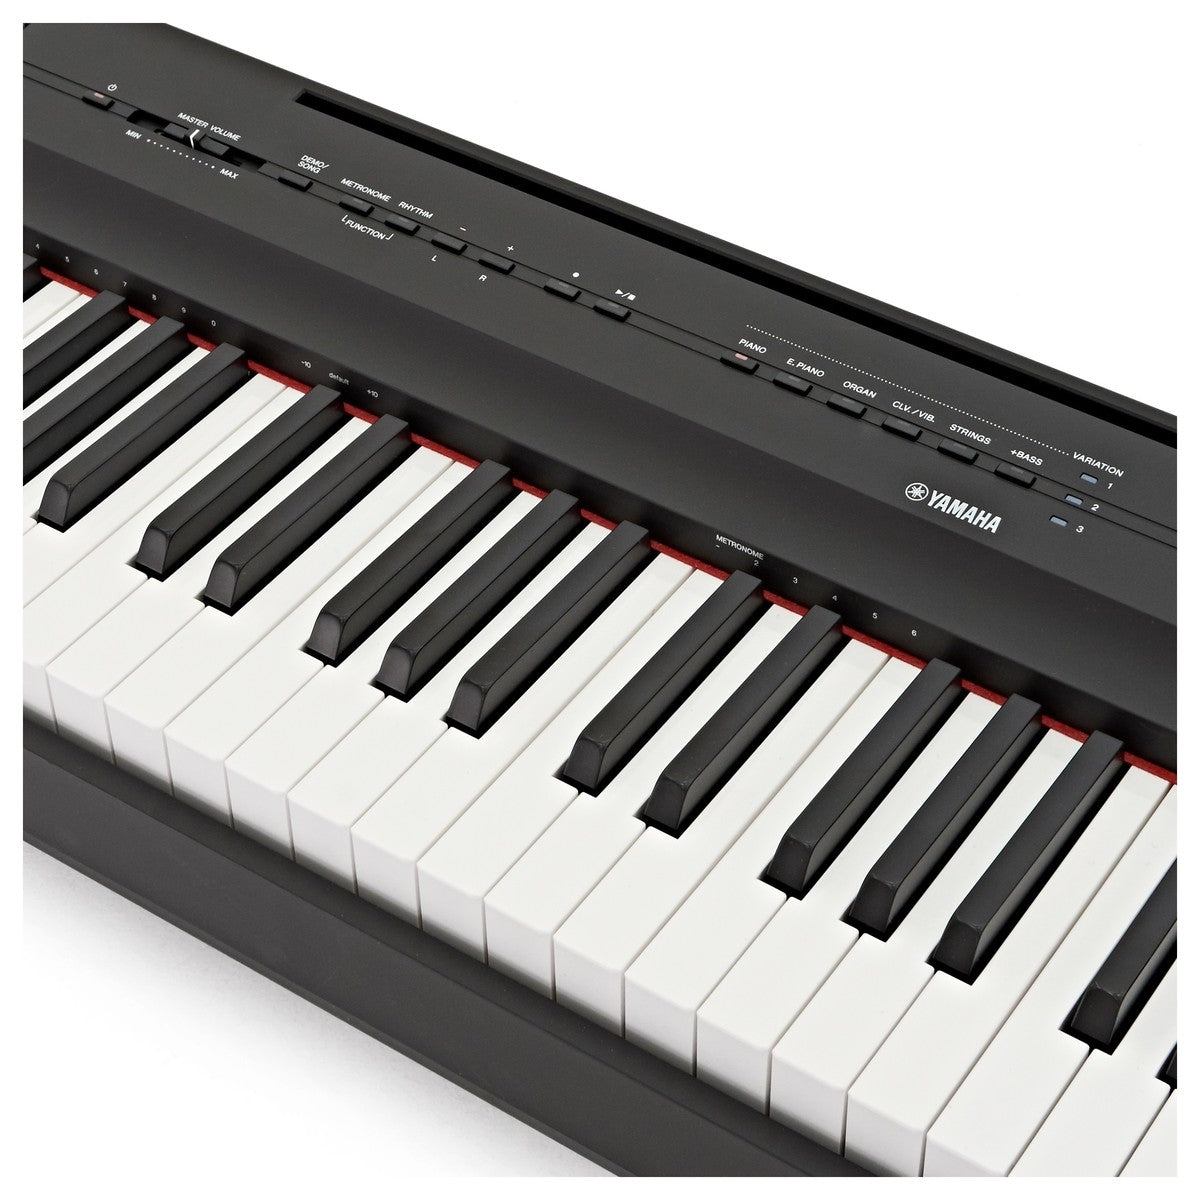 Yamaha L125 Stand for P-125 Digital Piano - Black